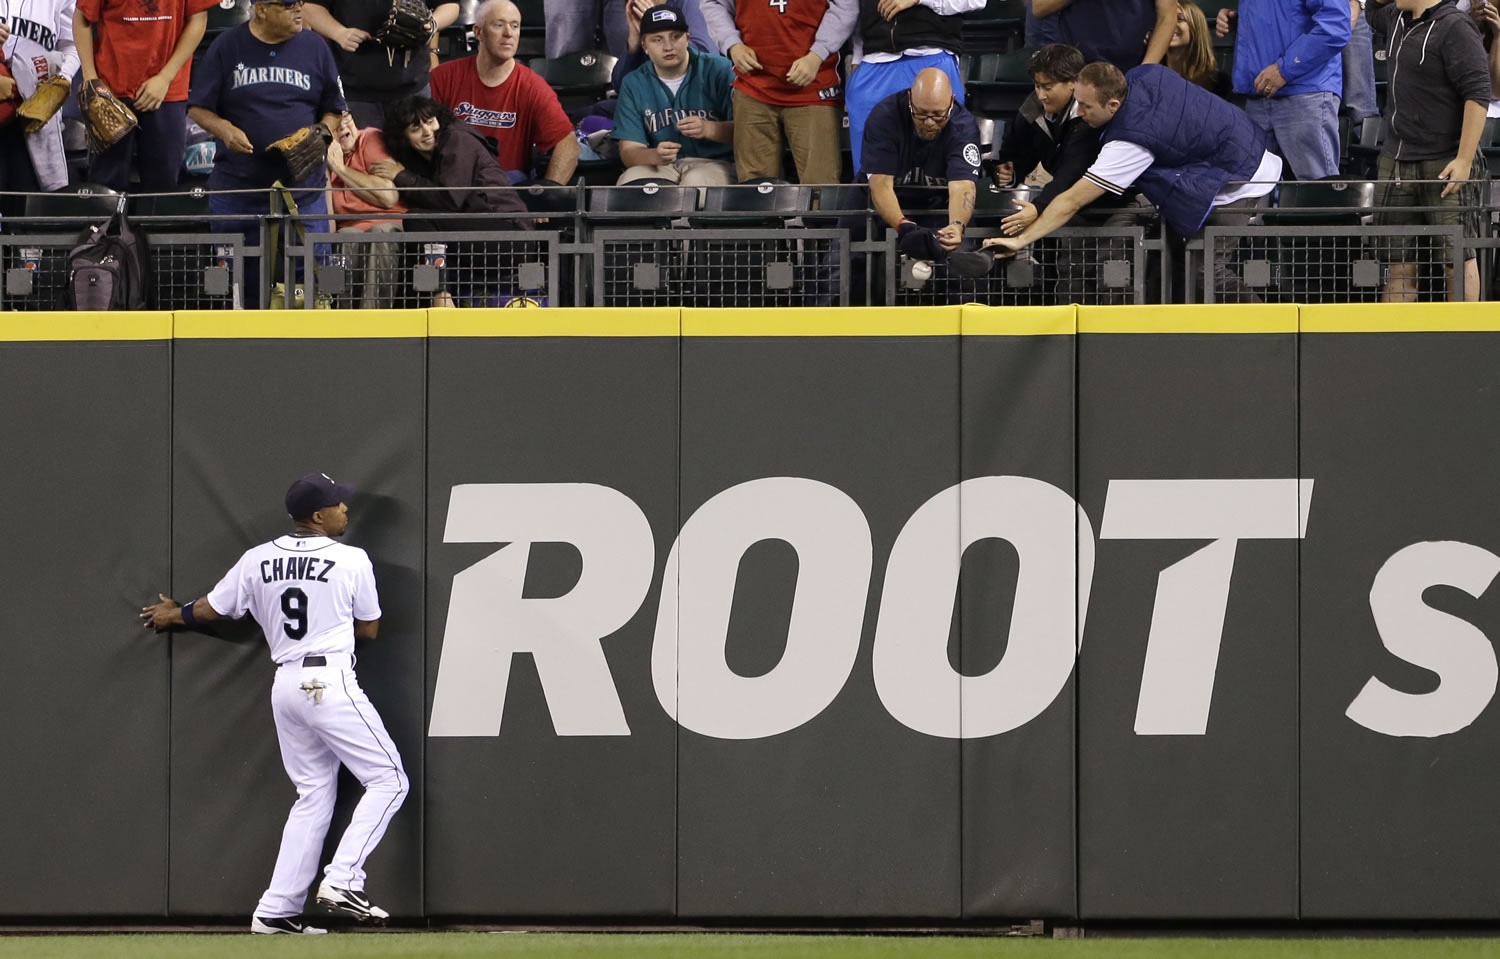 Seattle Mariners center fielder Endy Chavez watches as fans reach for the home run ball of Pittsburgh Pirates' Russell Martin in the second inning Tuesday.